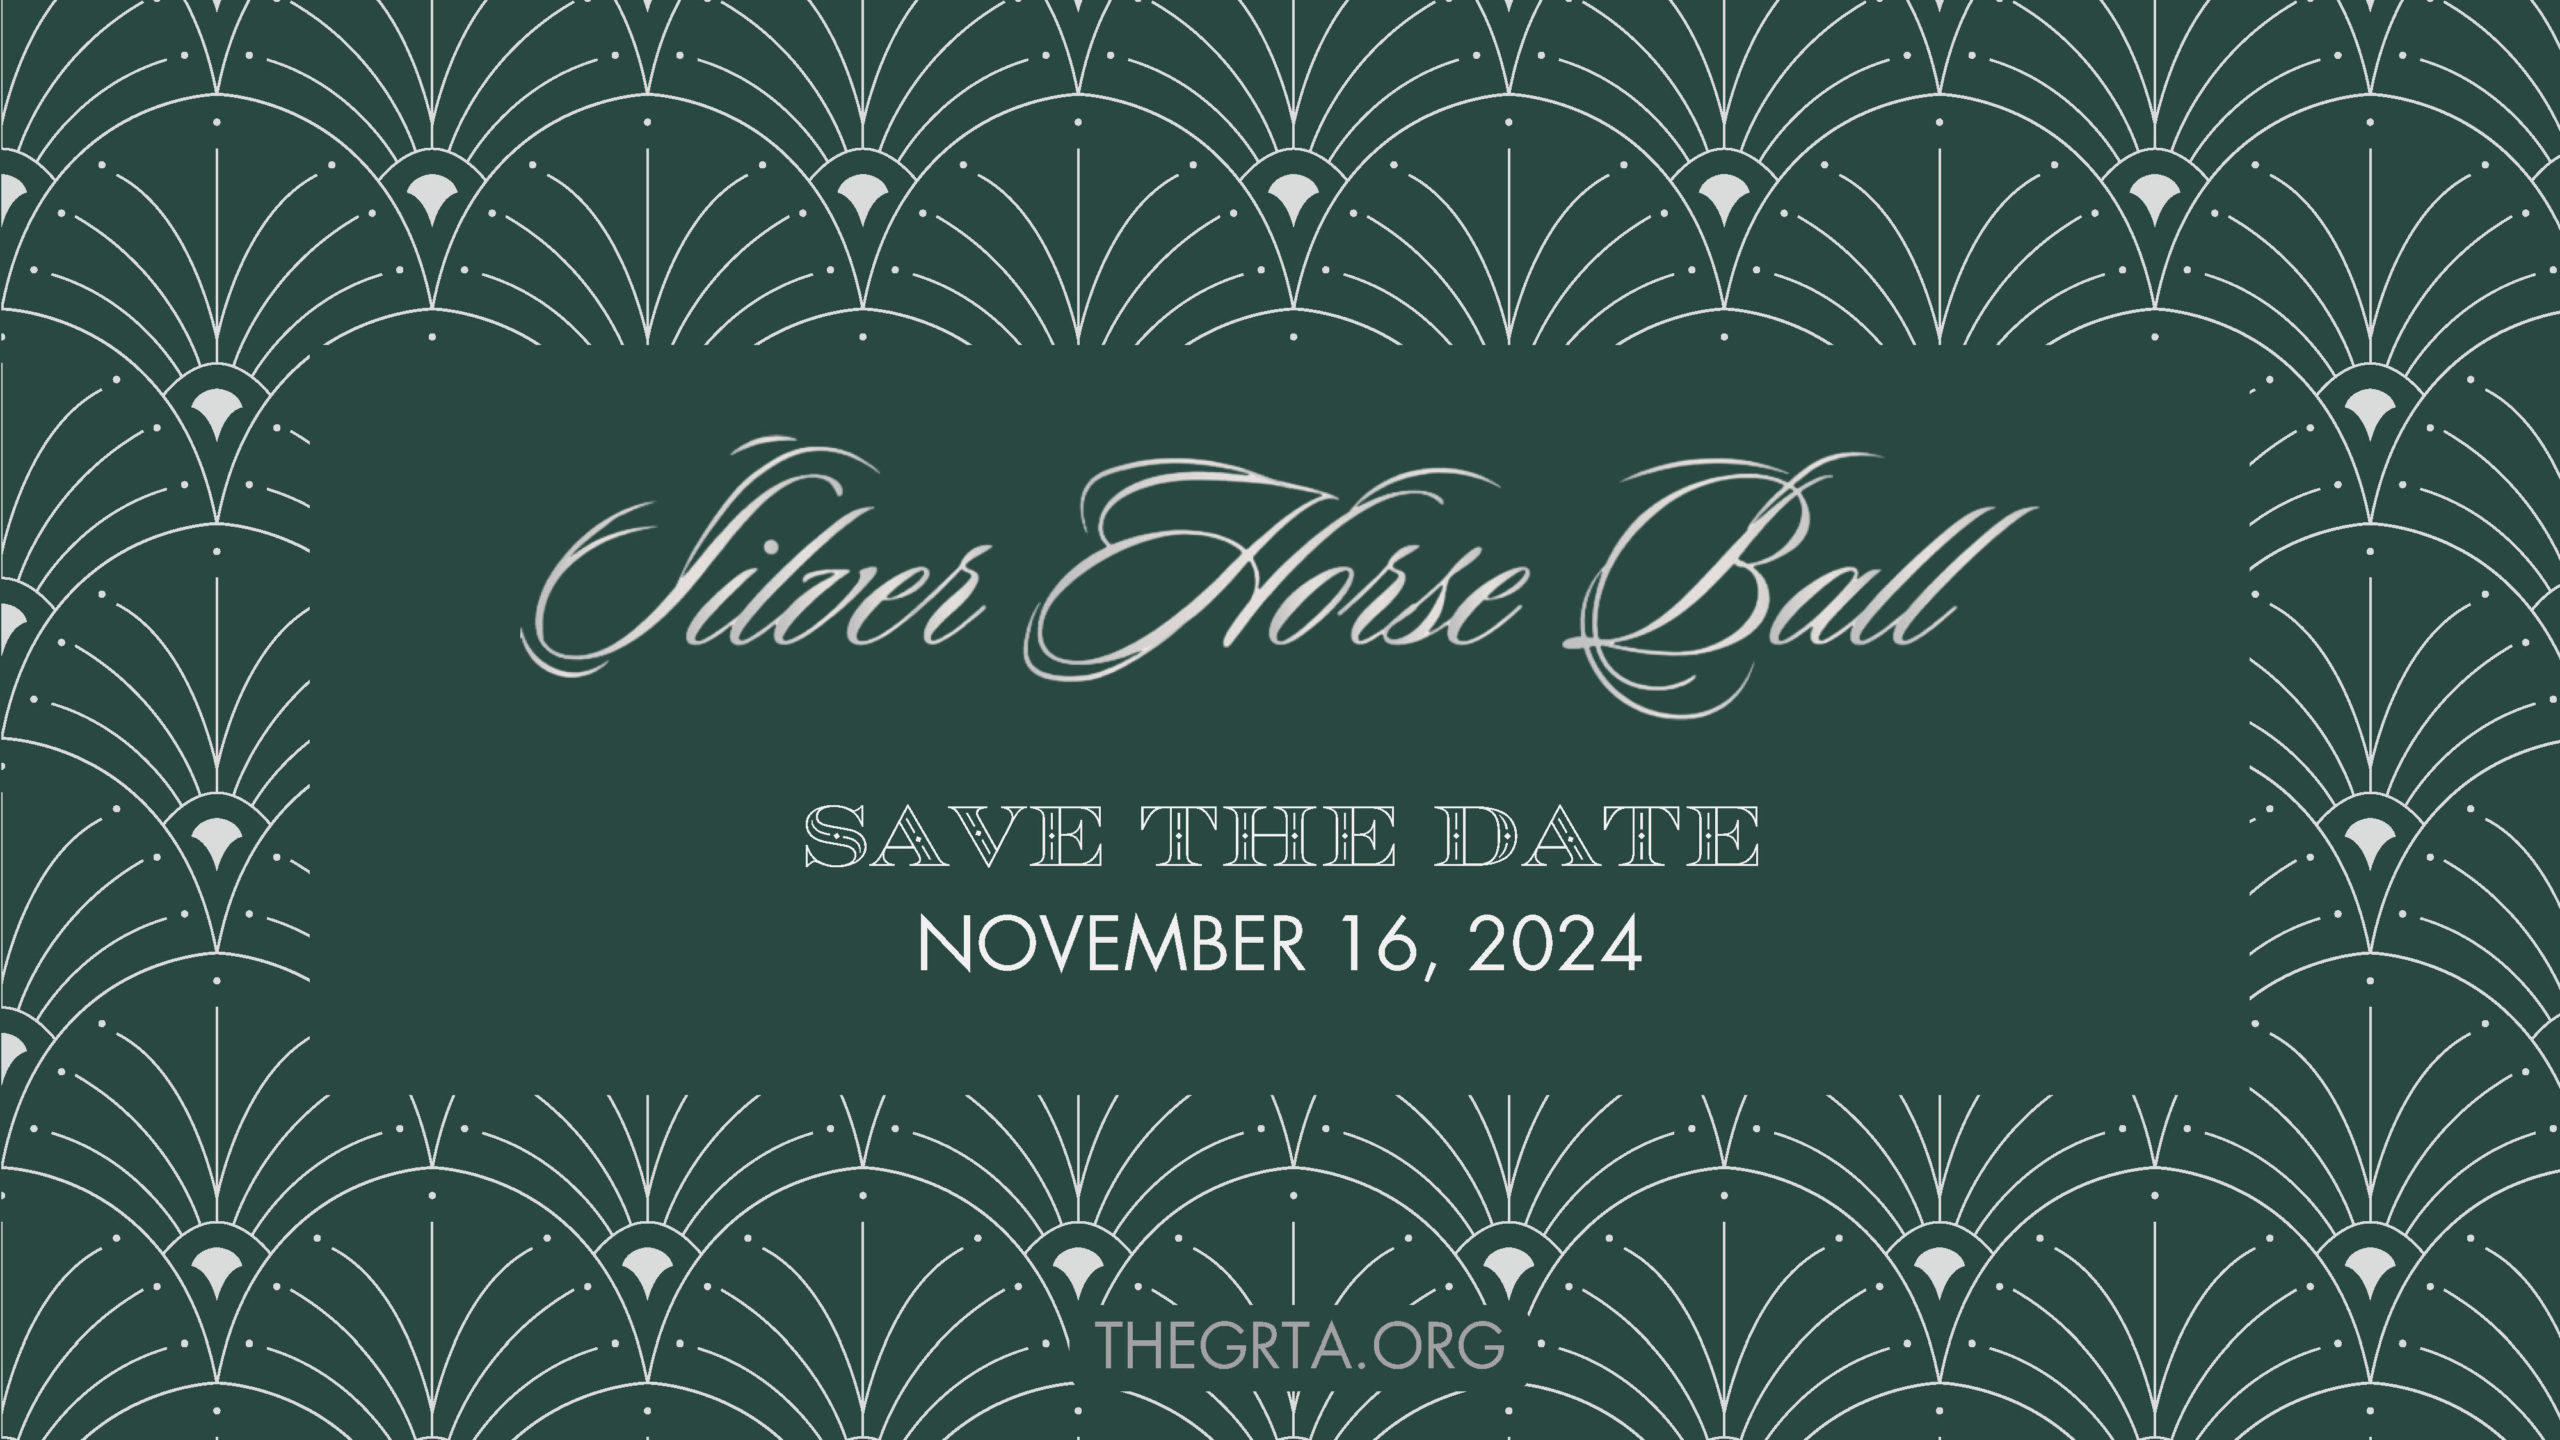 Silver Horse Ball - Save the Date! November 16, 2024